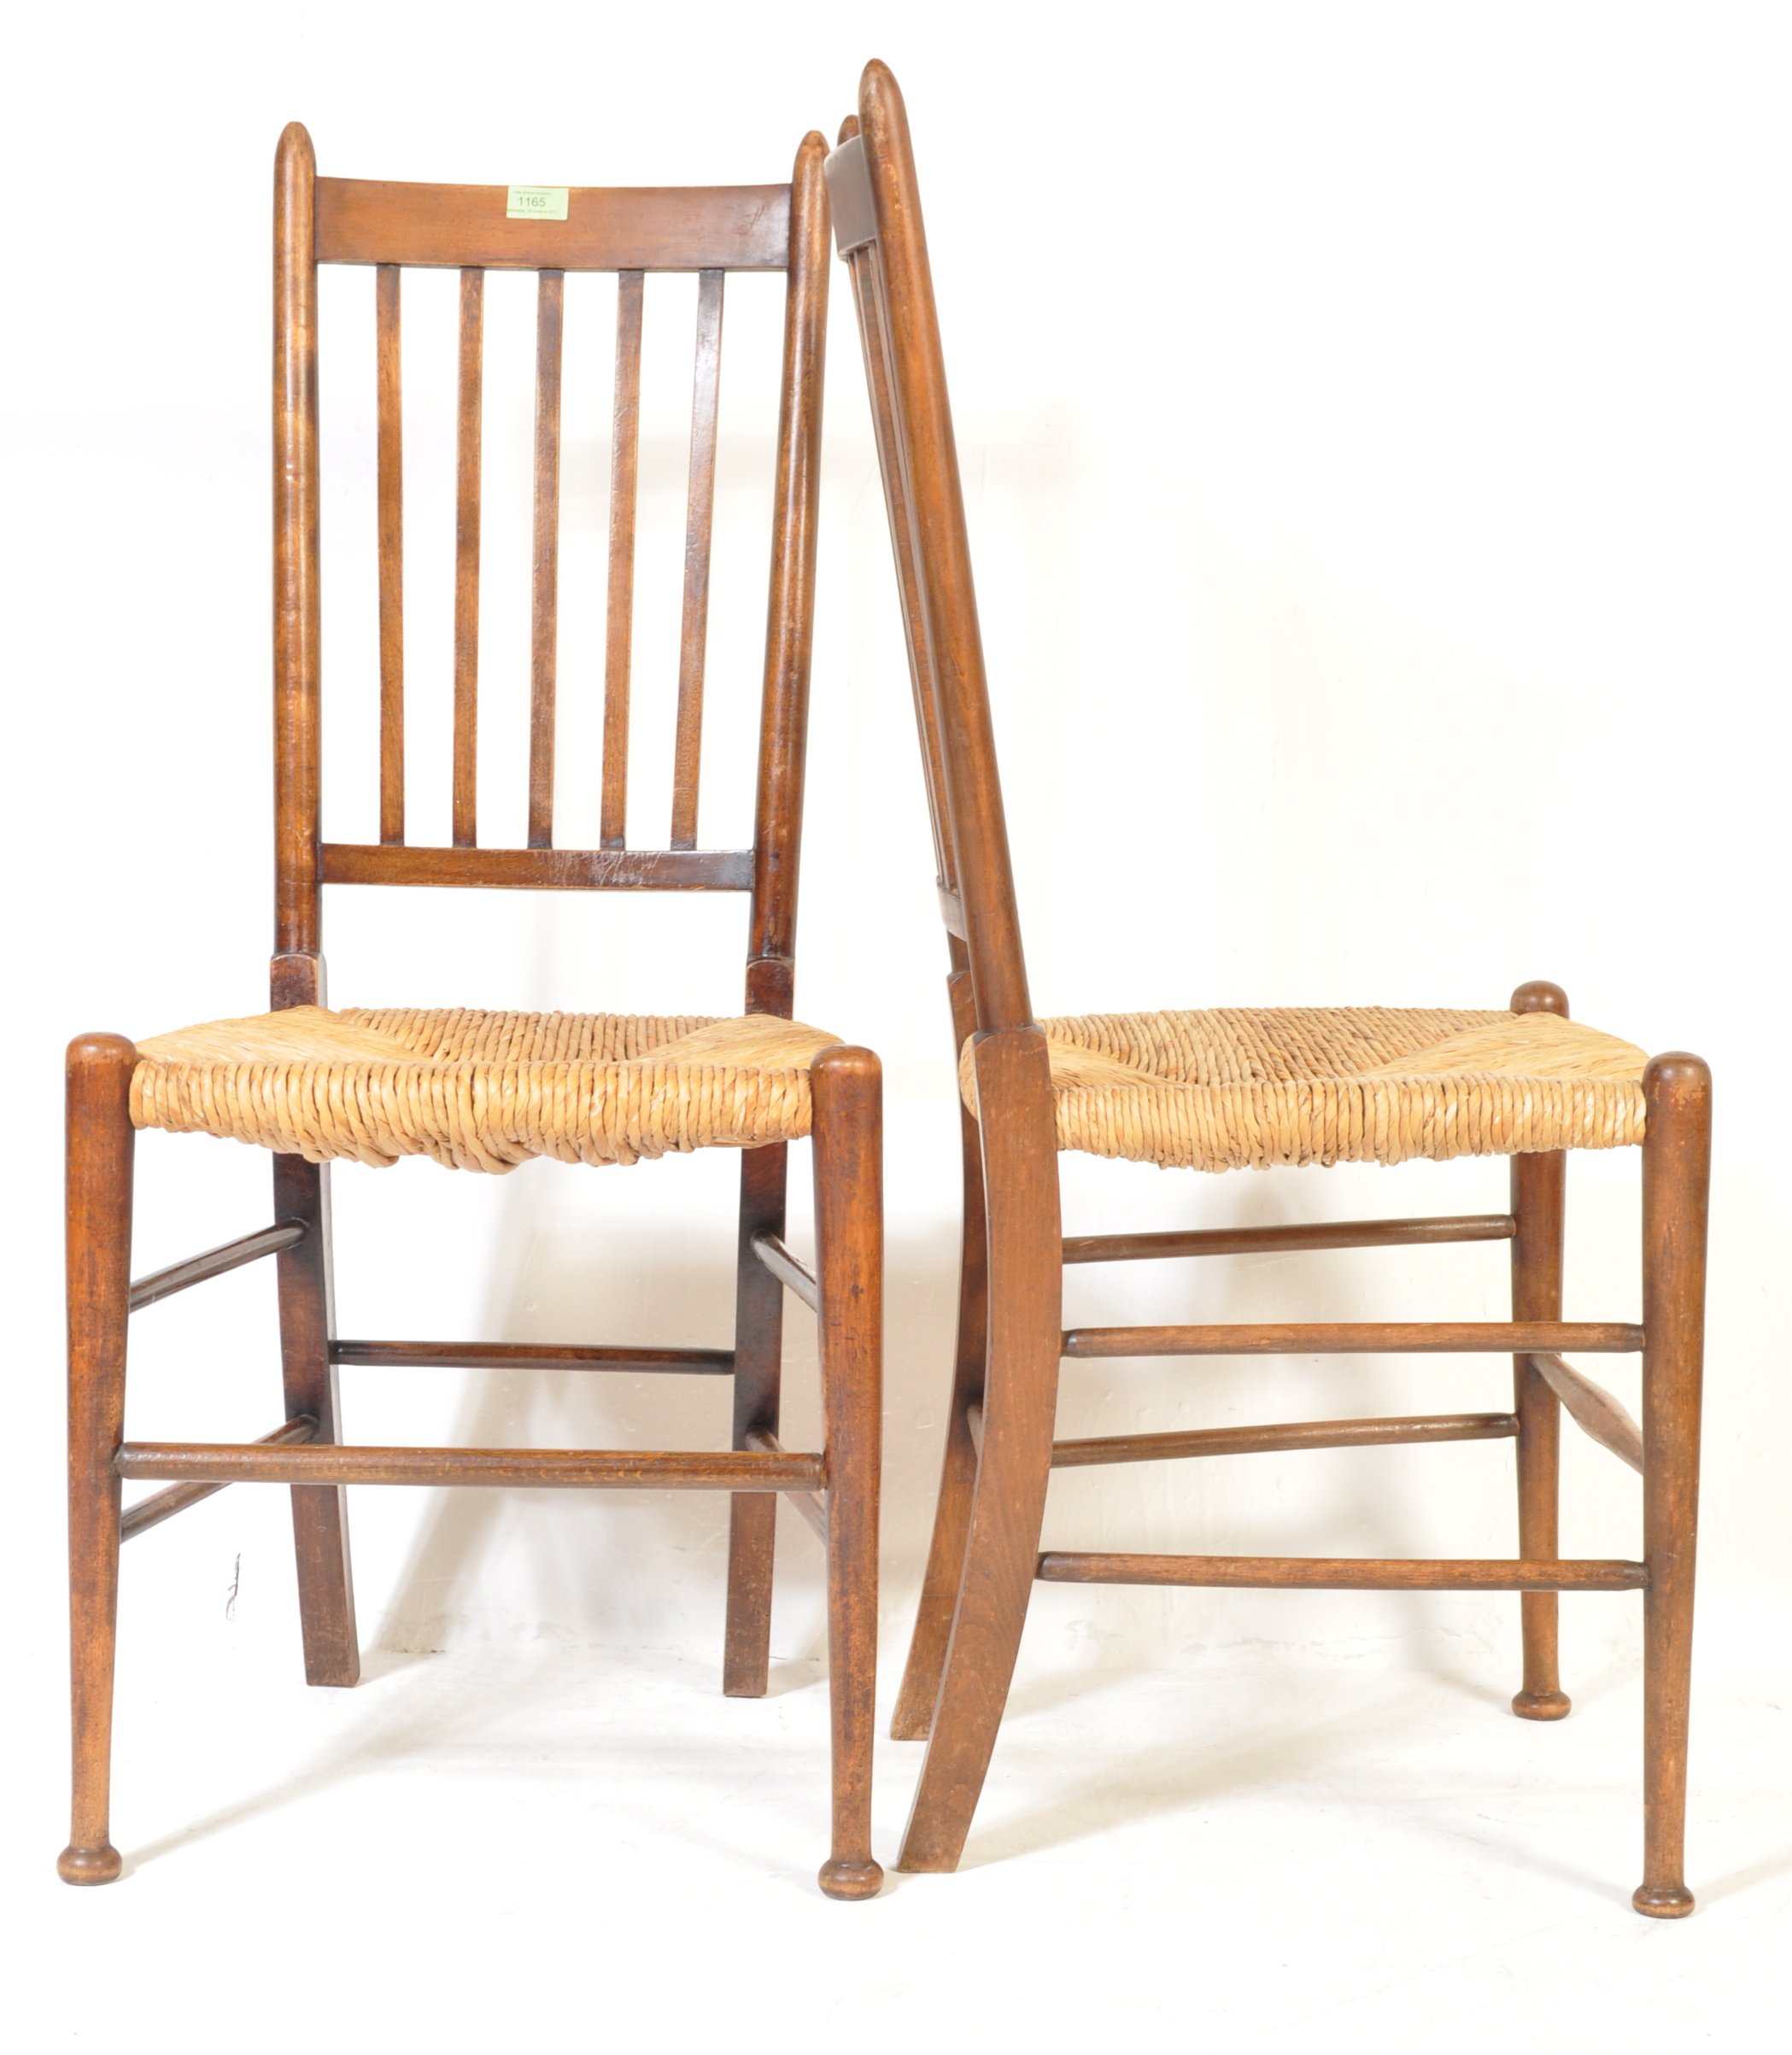 FOUR VINTAGE MID 20TH CENTURY COUNTRY FARM HOUSE CHAIRS - Image 6 of 7